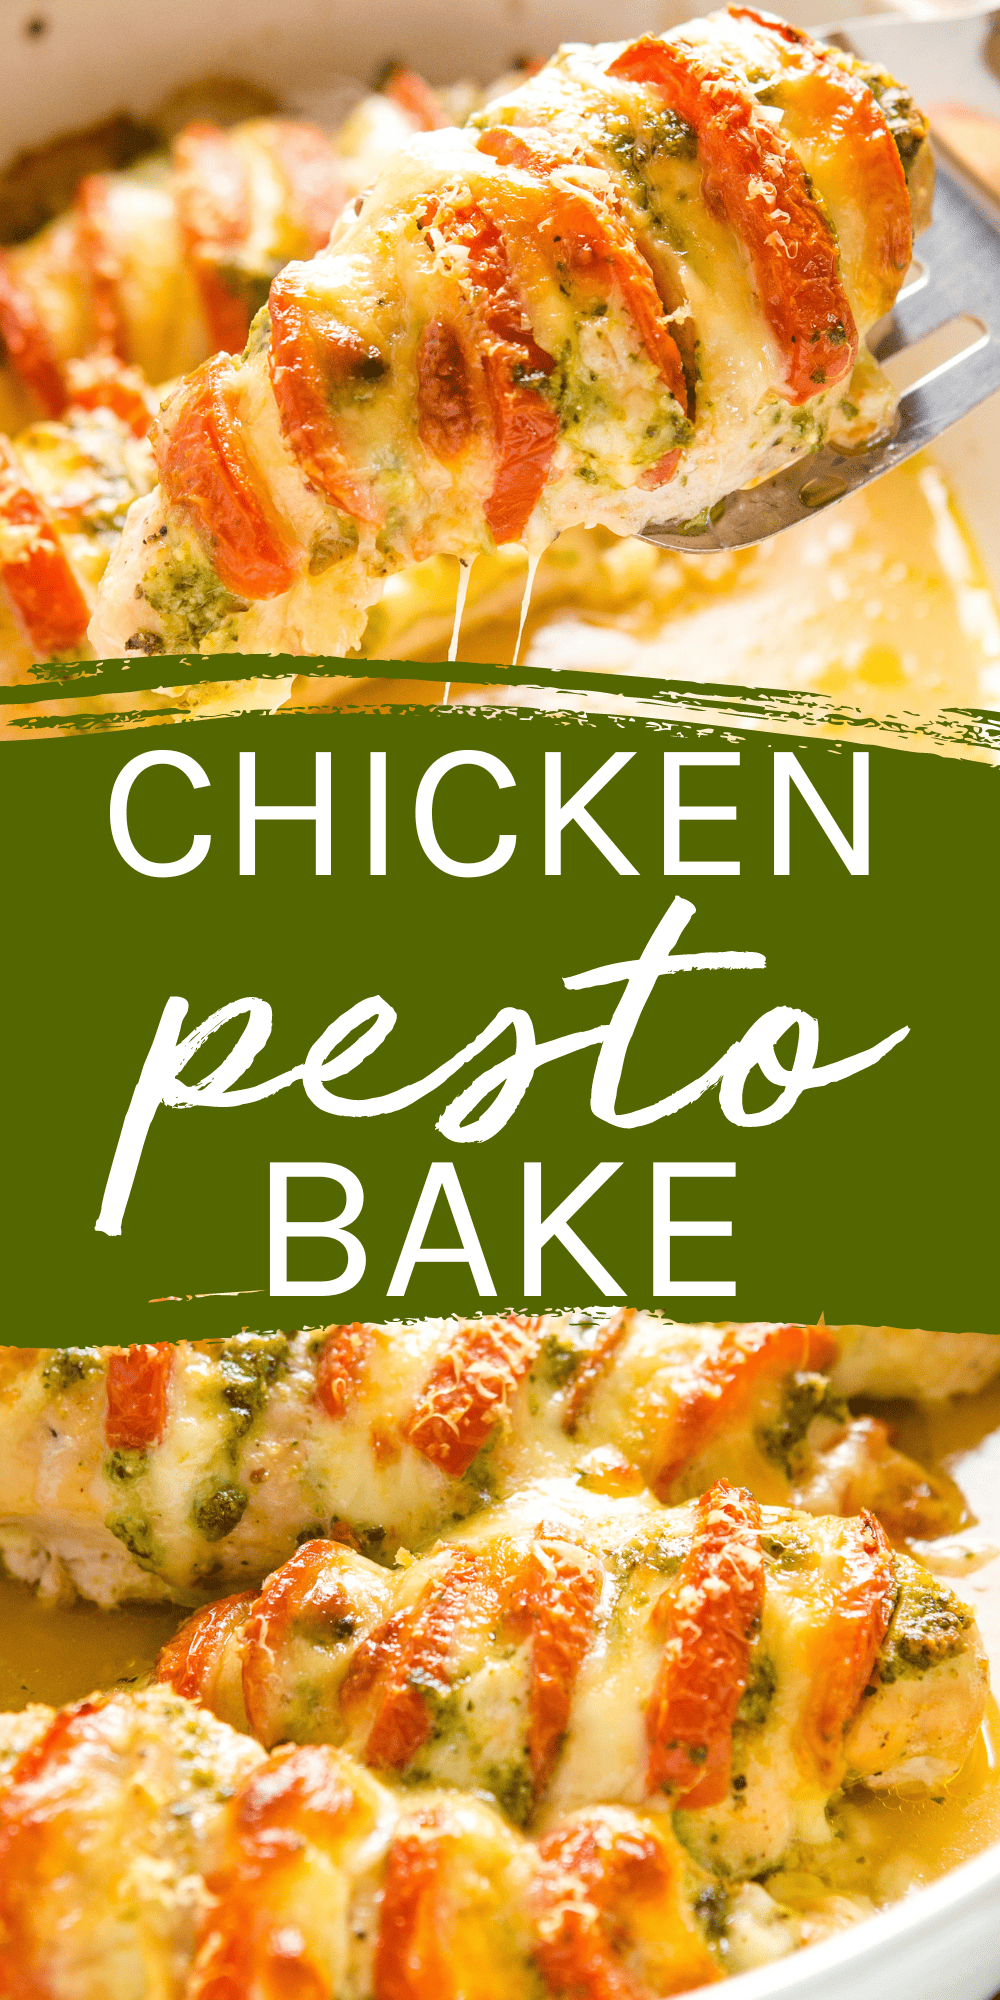 This Pesto Chicken Bake recipe is an easy low-carb protein-packed main dish with fresh tomato, pesto & melted mozzarella cheese. Recipe from thebusybaker.ca! #pestochicken #pestochickenbake #chickenandpesto via @busybakerblog